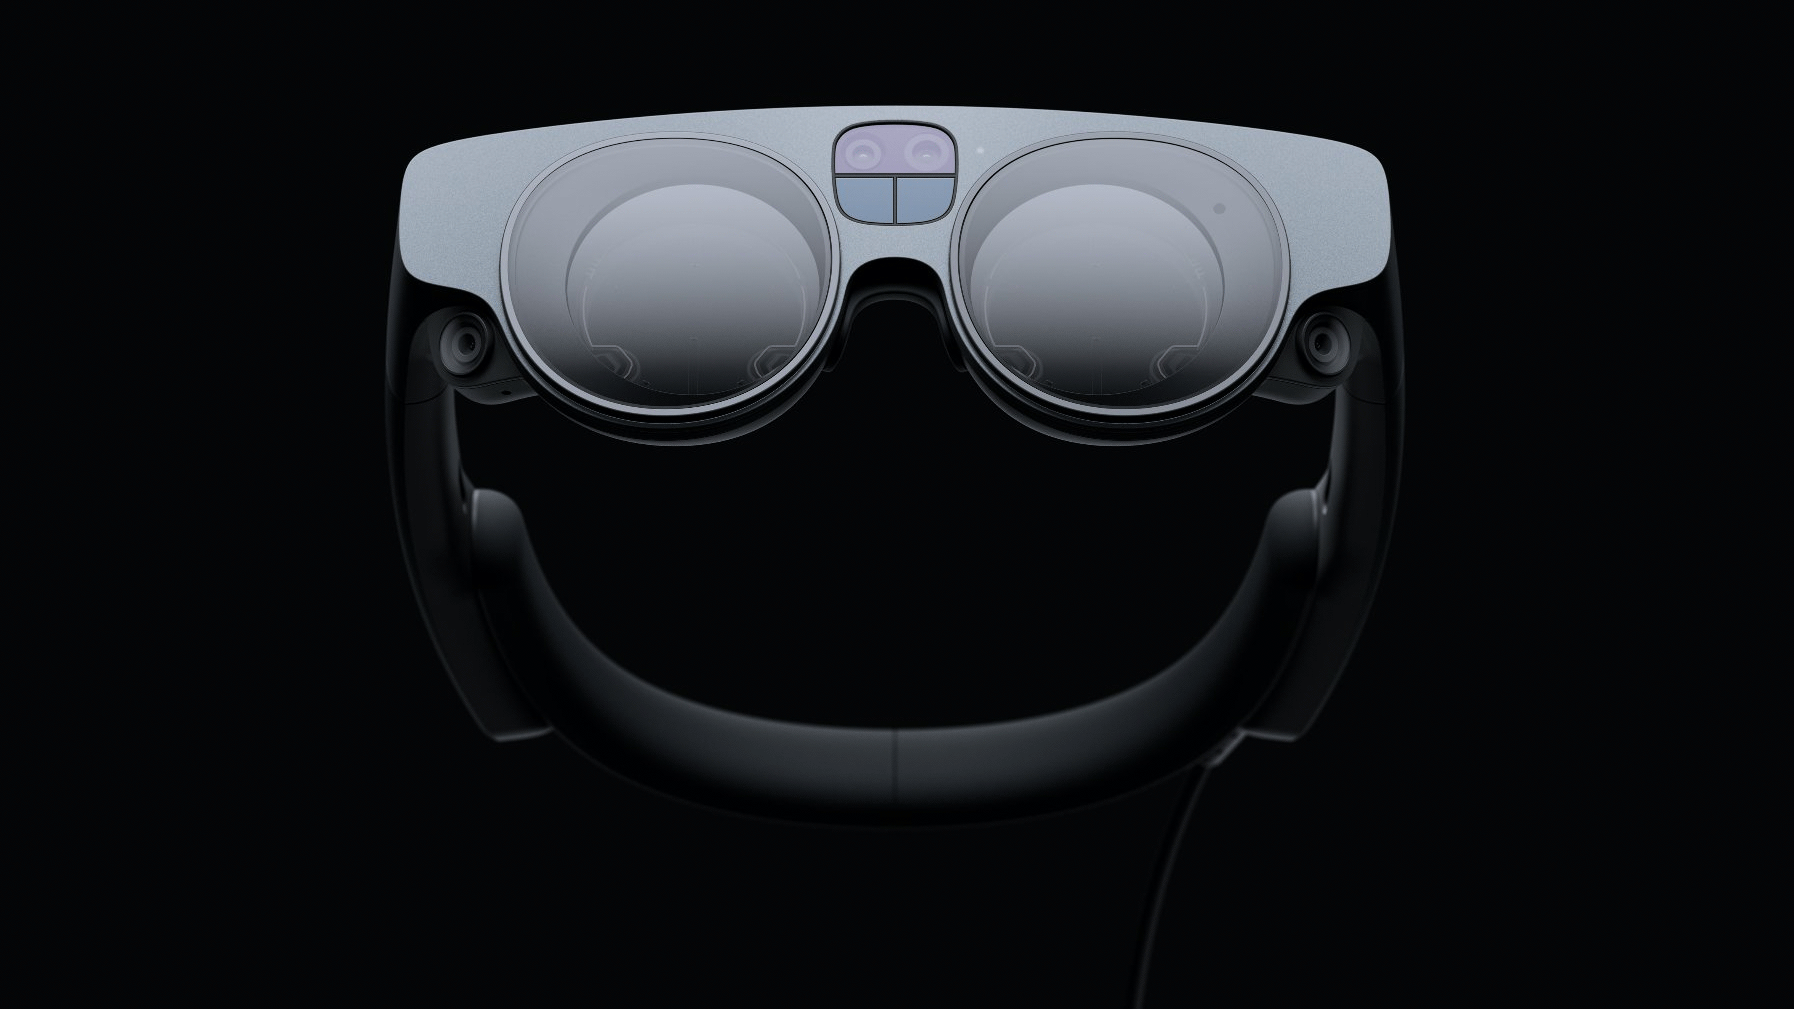 New Magic Leap 2 Details Shed Light on Specs & Features